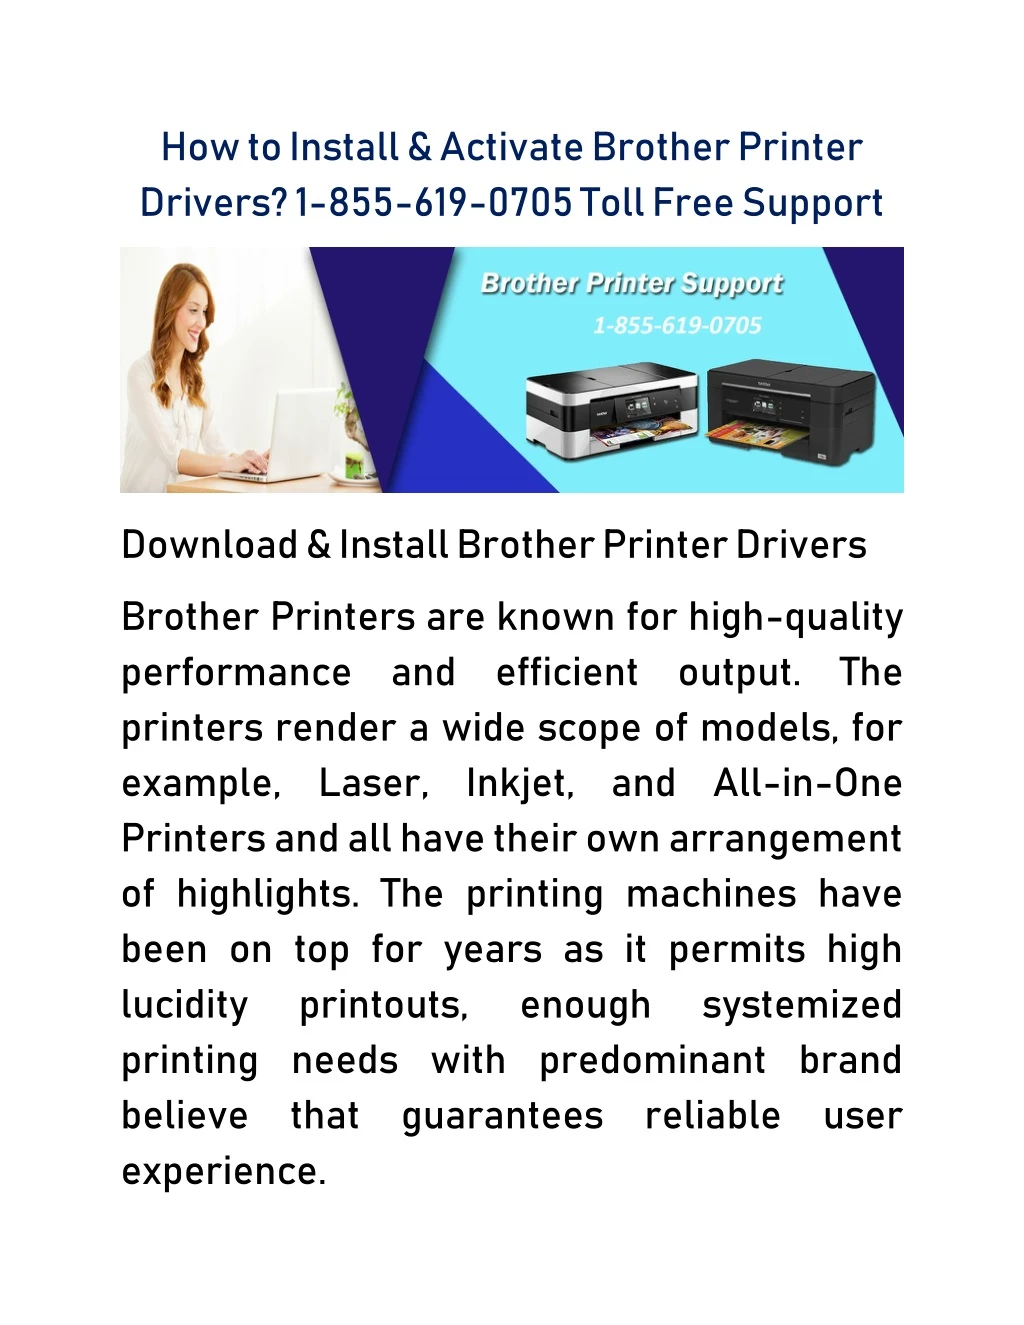 how to install activate brother printer drivers